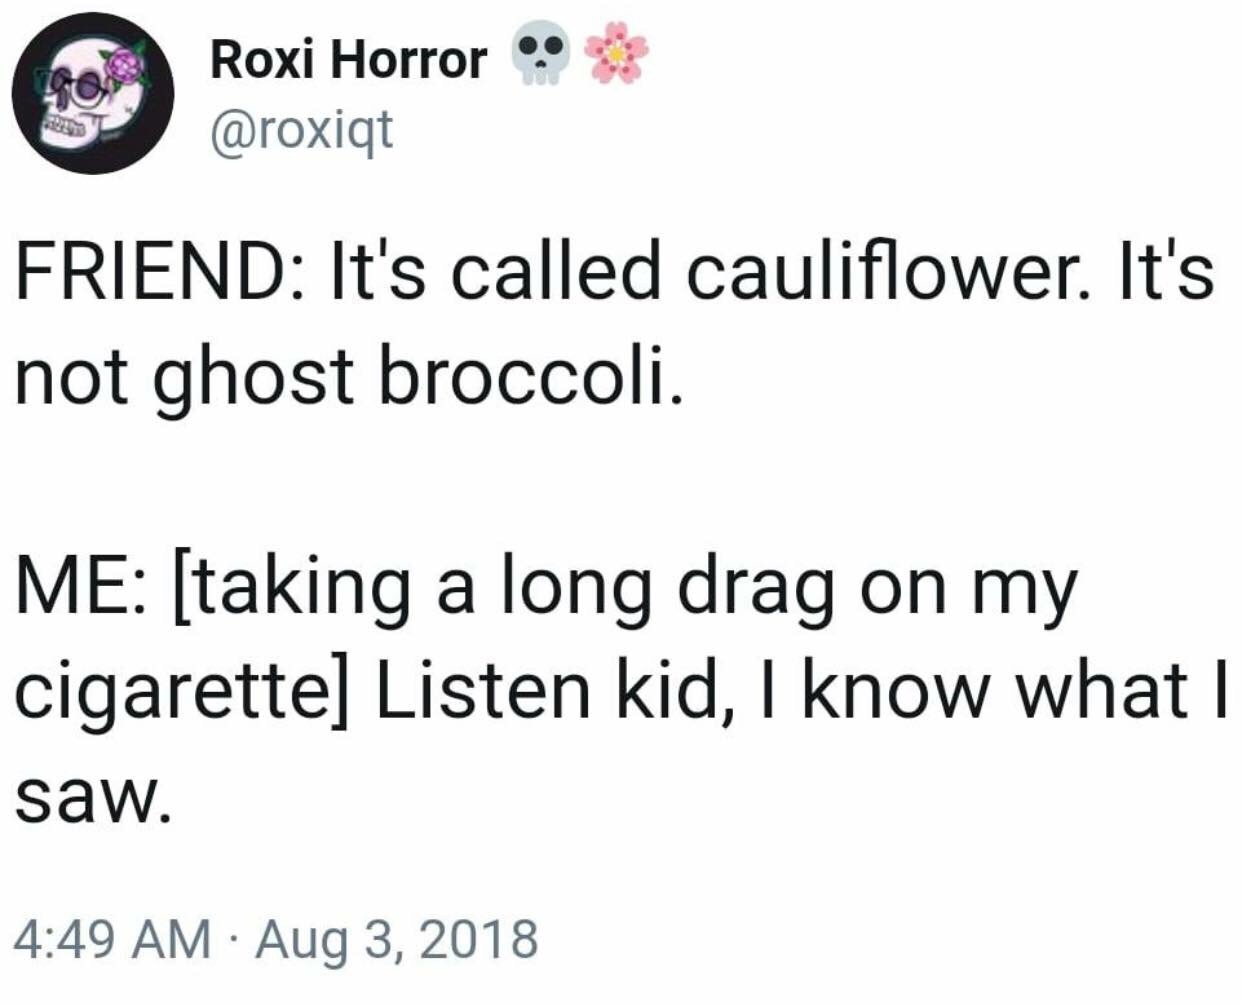 memes - ghost broccoli - Roxi Horror Friend It's called cauliflower. It's not ghost broccoli. Me taking a long drag on my cigarette Listen kid, I know what I saw.